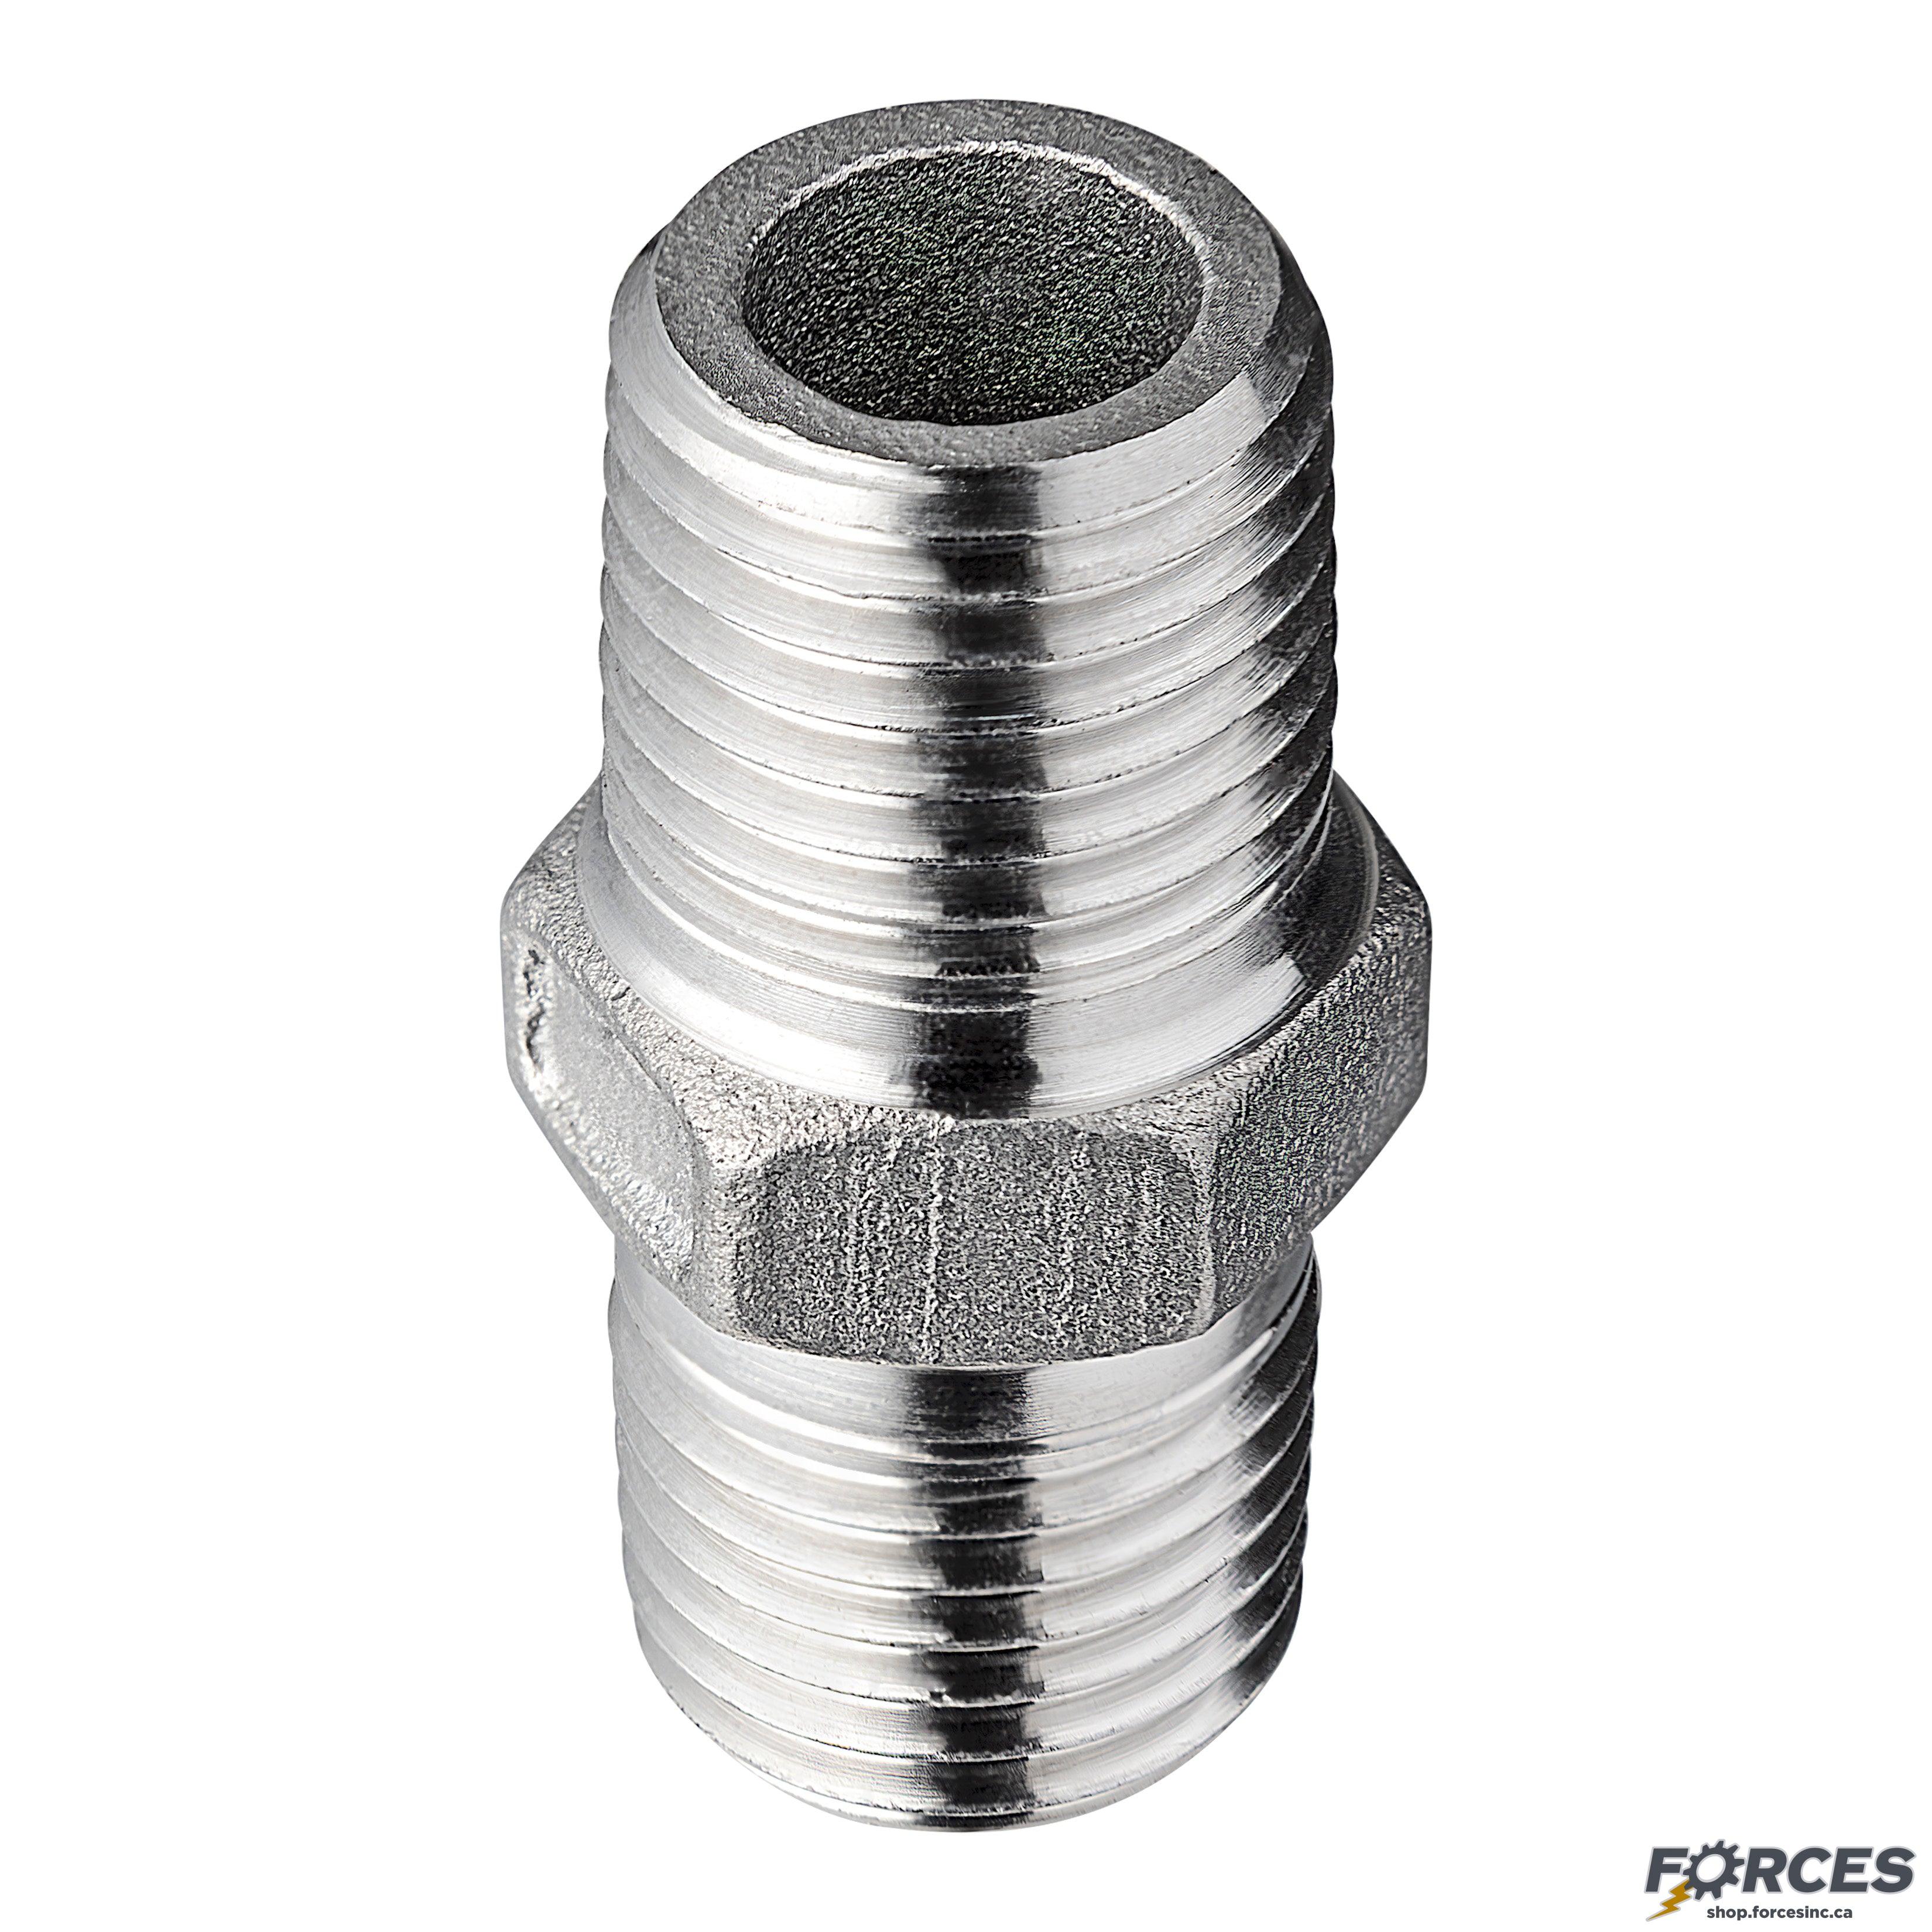 1" Hex Nipple NPT #150 - Stainless Steel 316 - Forces Inc